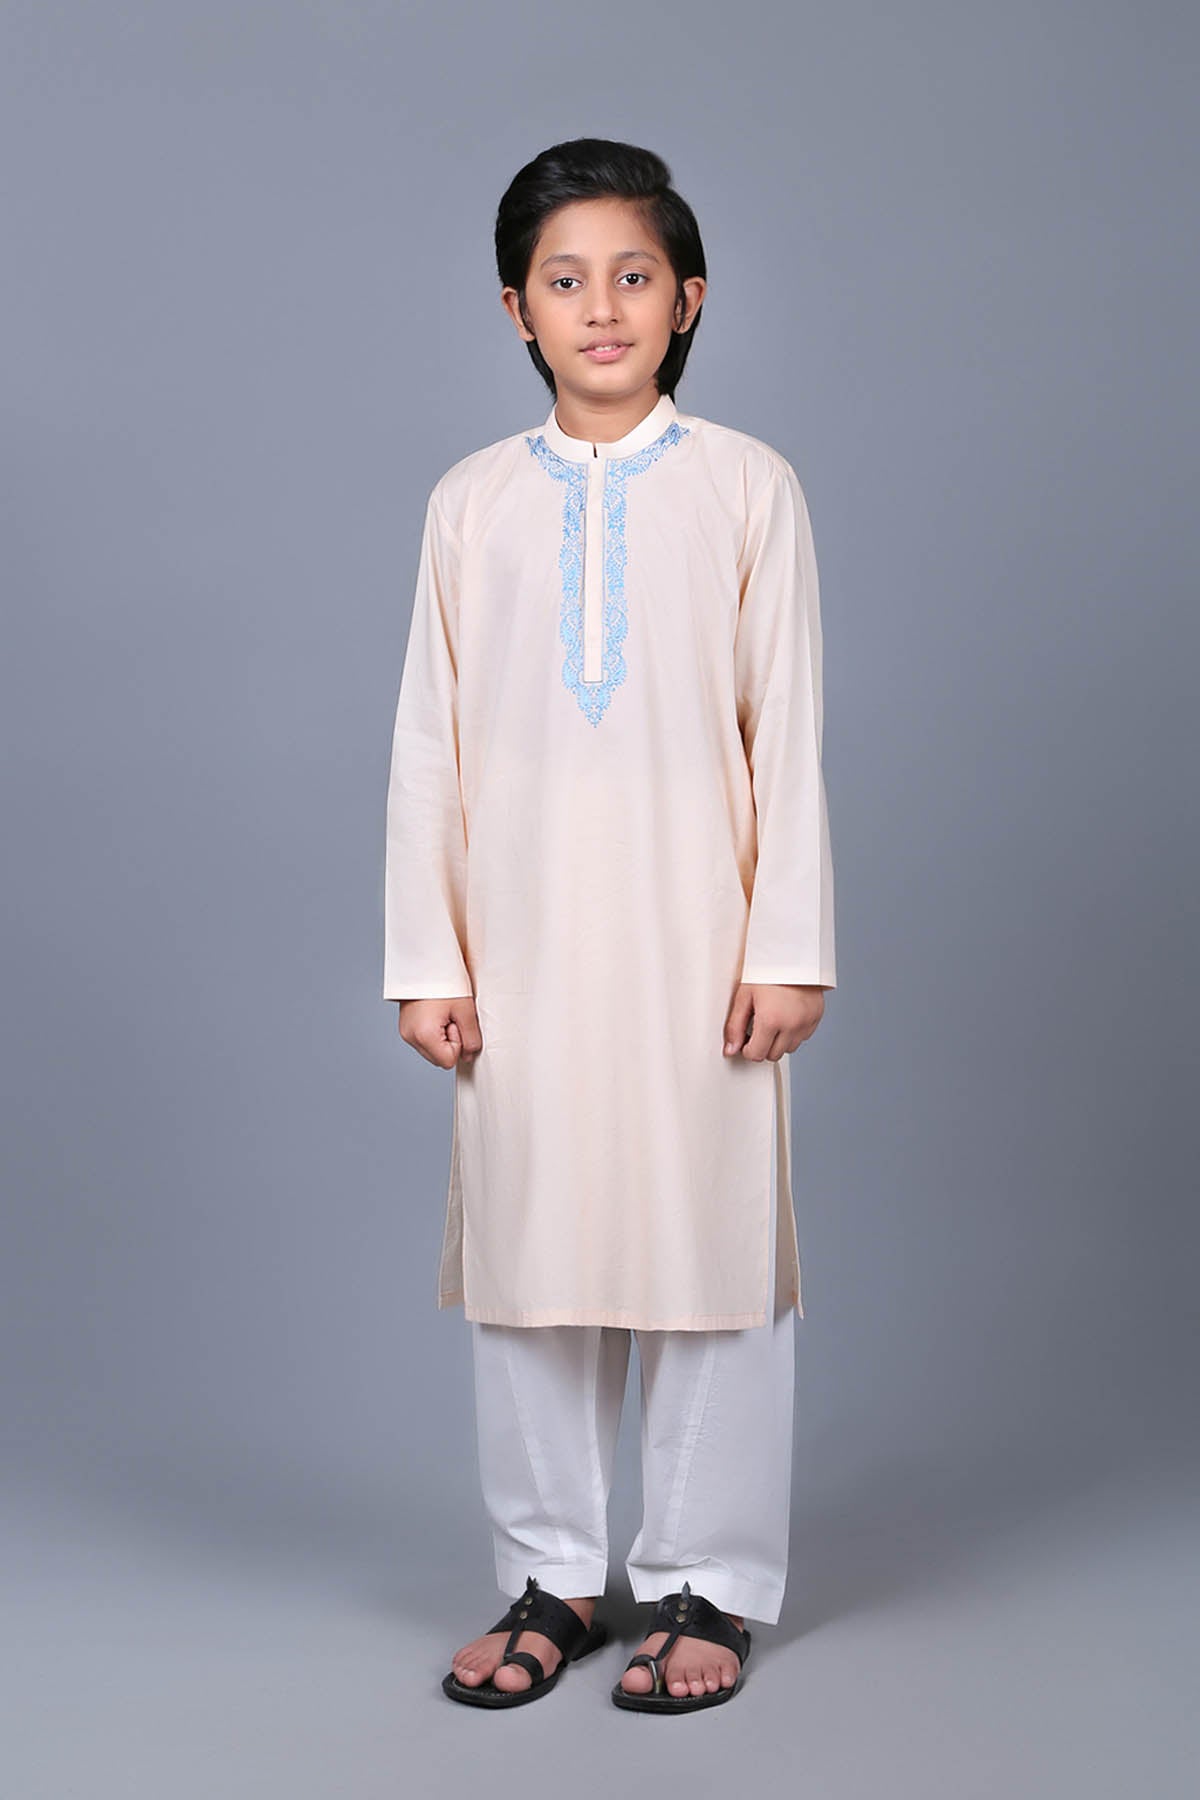 EMBROIDERED BOYS SUIT